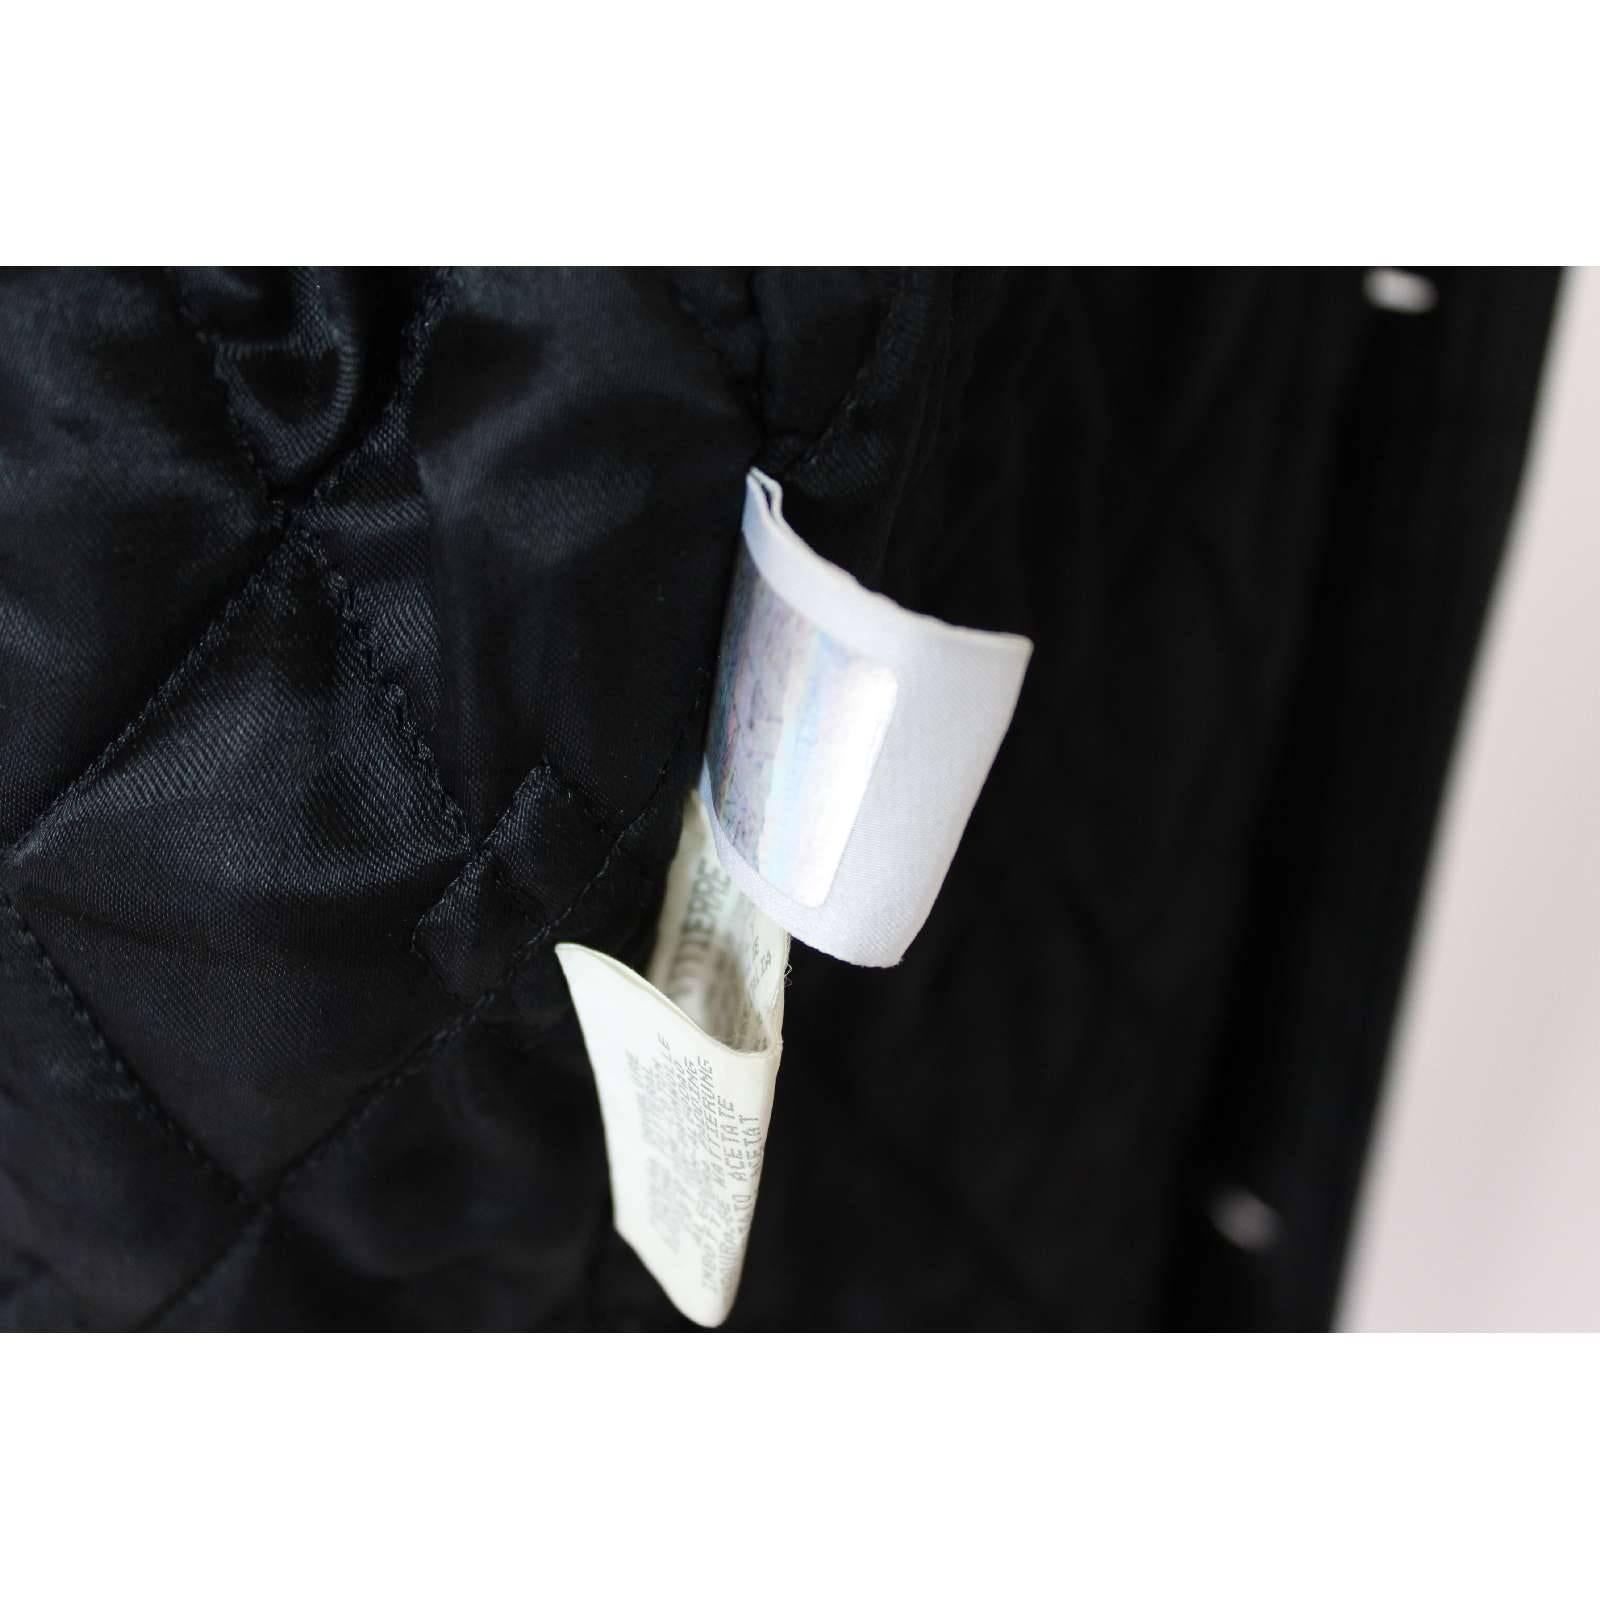 Versus Gianni Versace black leather motorcycle raincoat trench coat size 38/52 For Sale 4